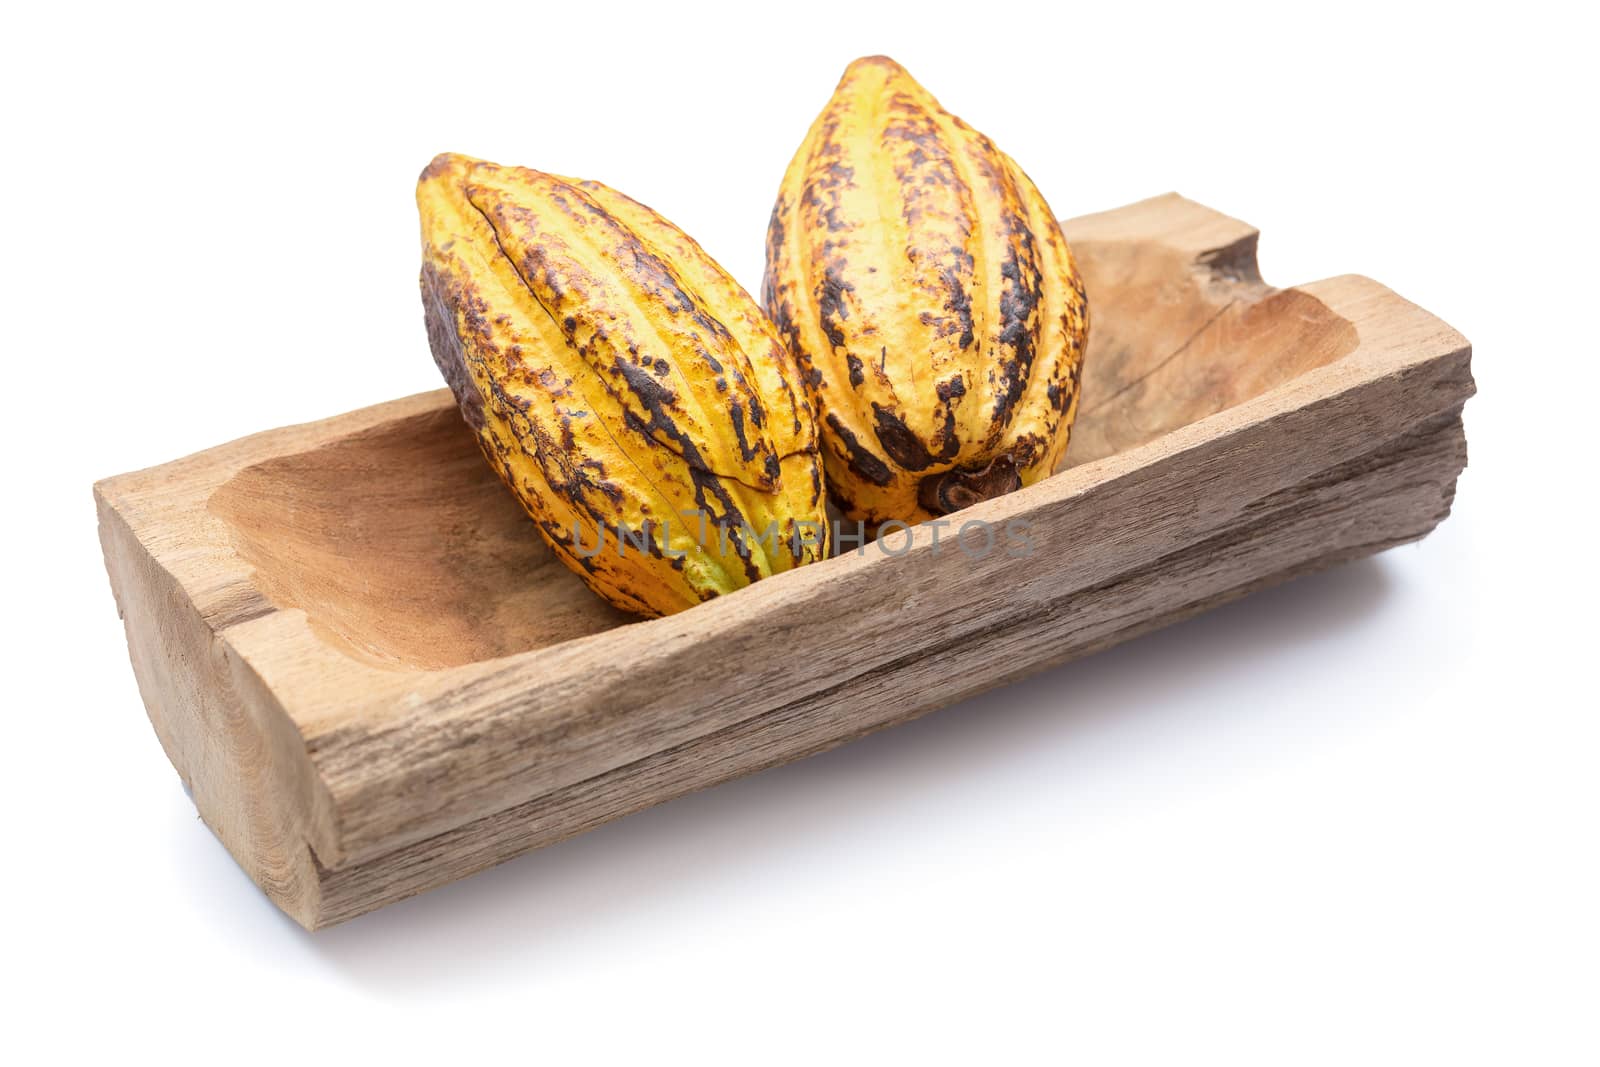 Cocoa fruit, raw cacao beans, Cocoa pod isolated on white backgr by kaiskynet